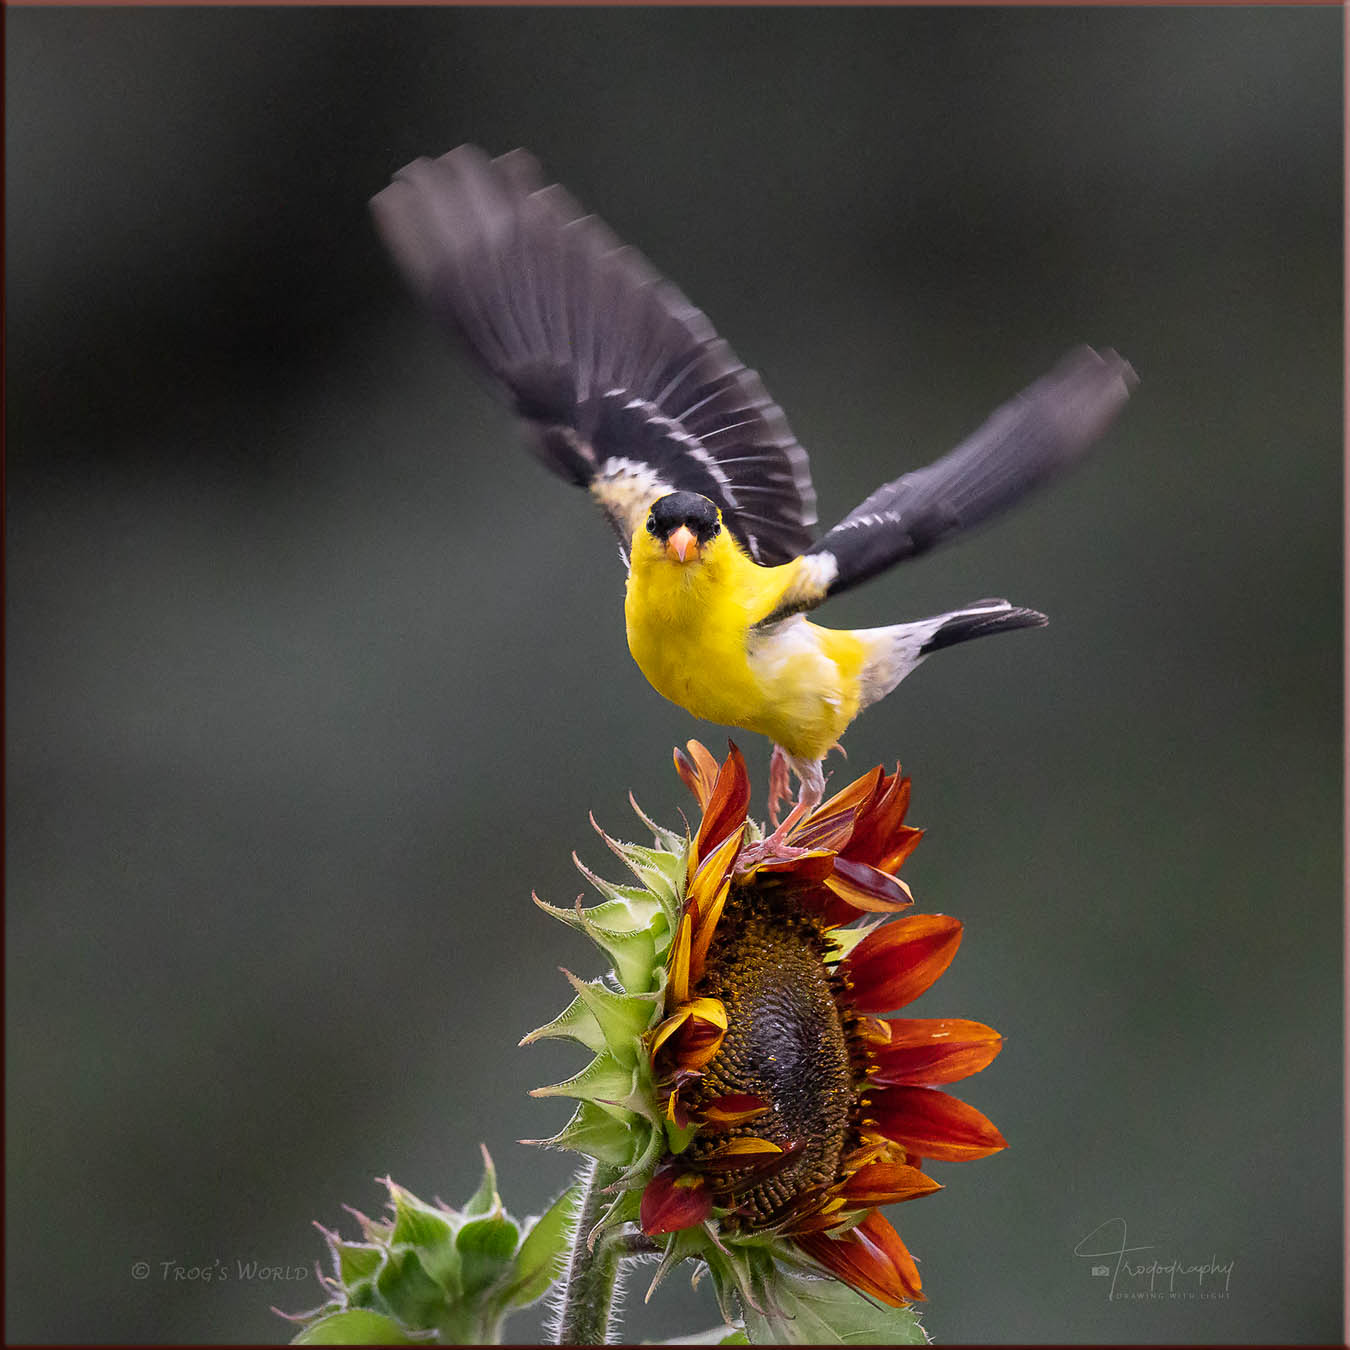 American Goldfinch lifting off from a sunflower